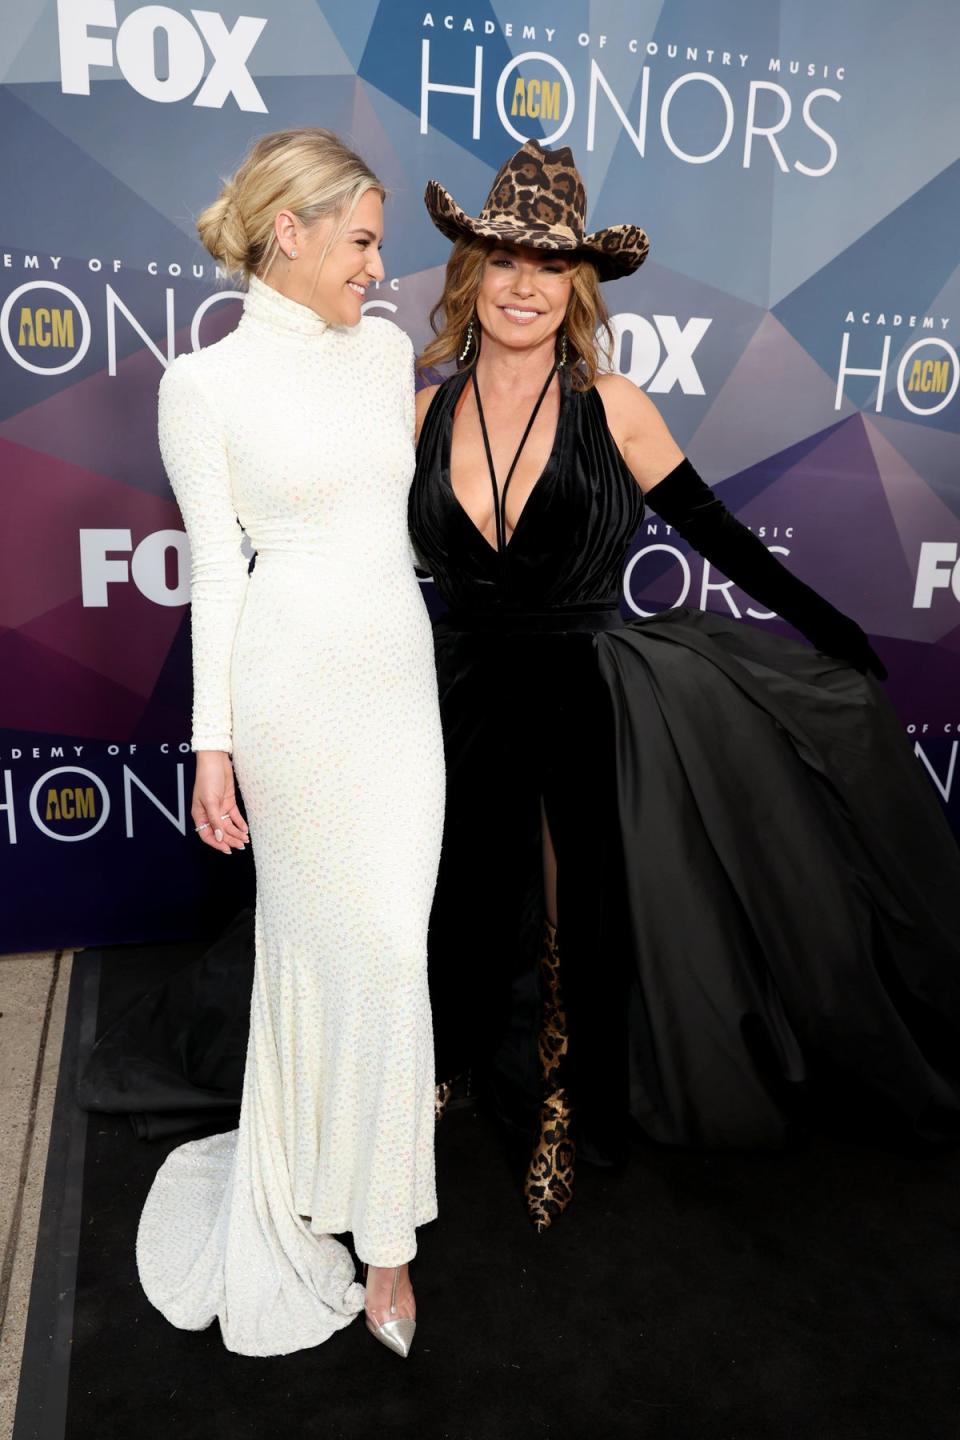 Shania Twain and Kelsea Ballerini (Getty Images for ACM)